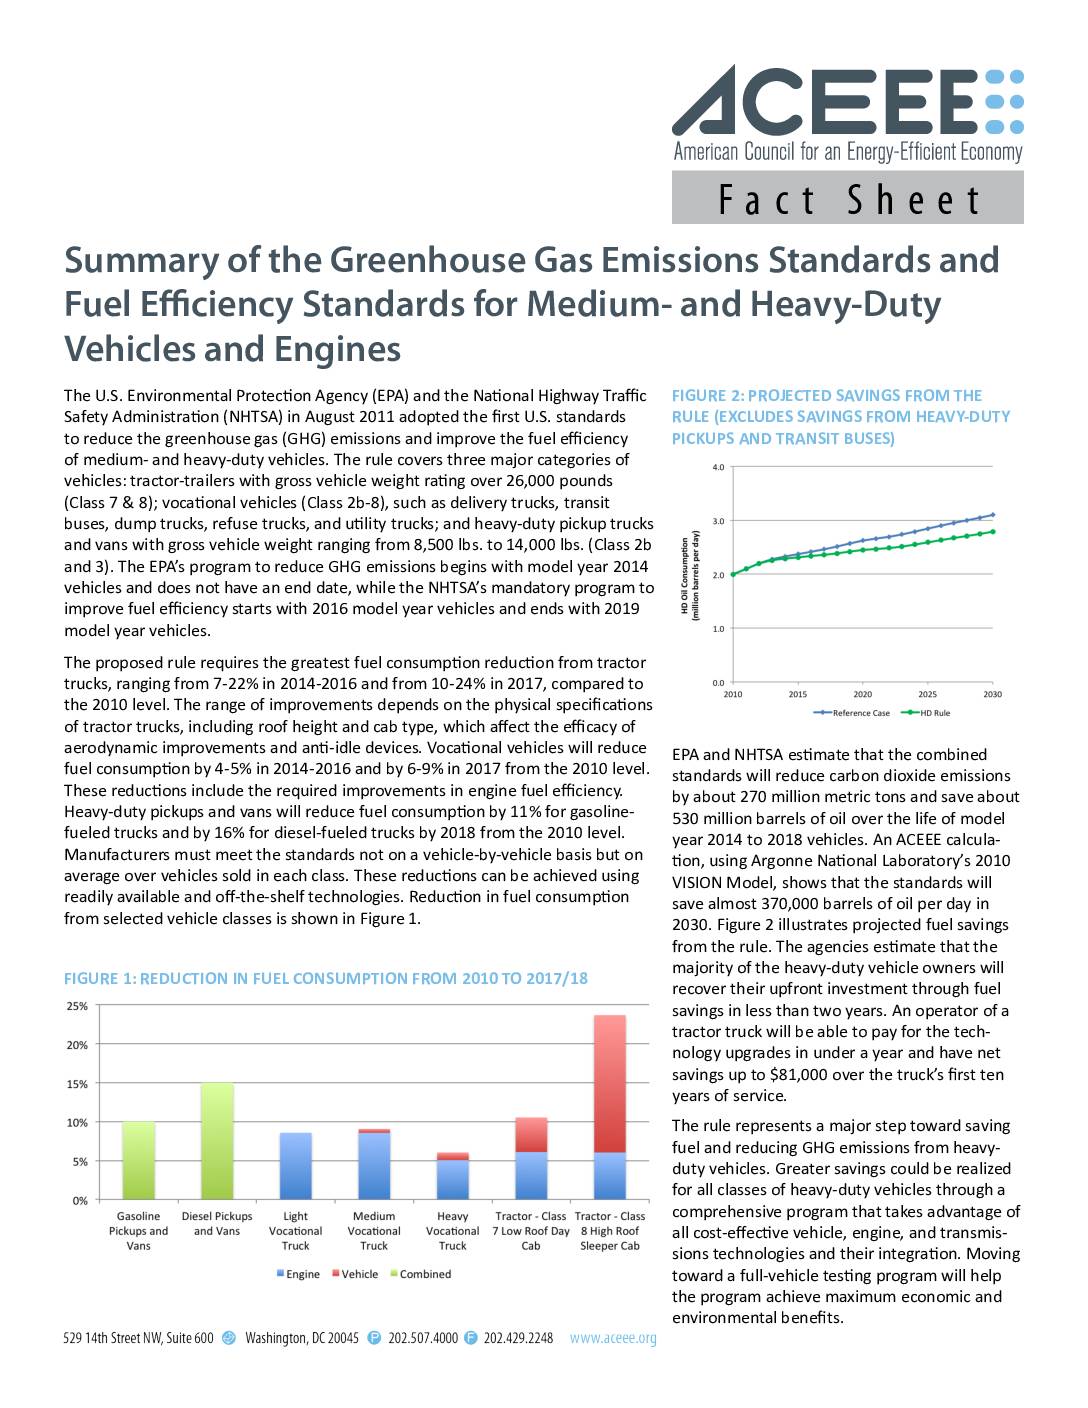 Summary of Greenhouse Gas Emissions Standards and Fuel Efficiency Standards for Medium- and Heavy-Duty Vehicles and Engines